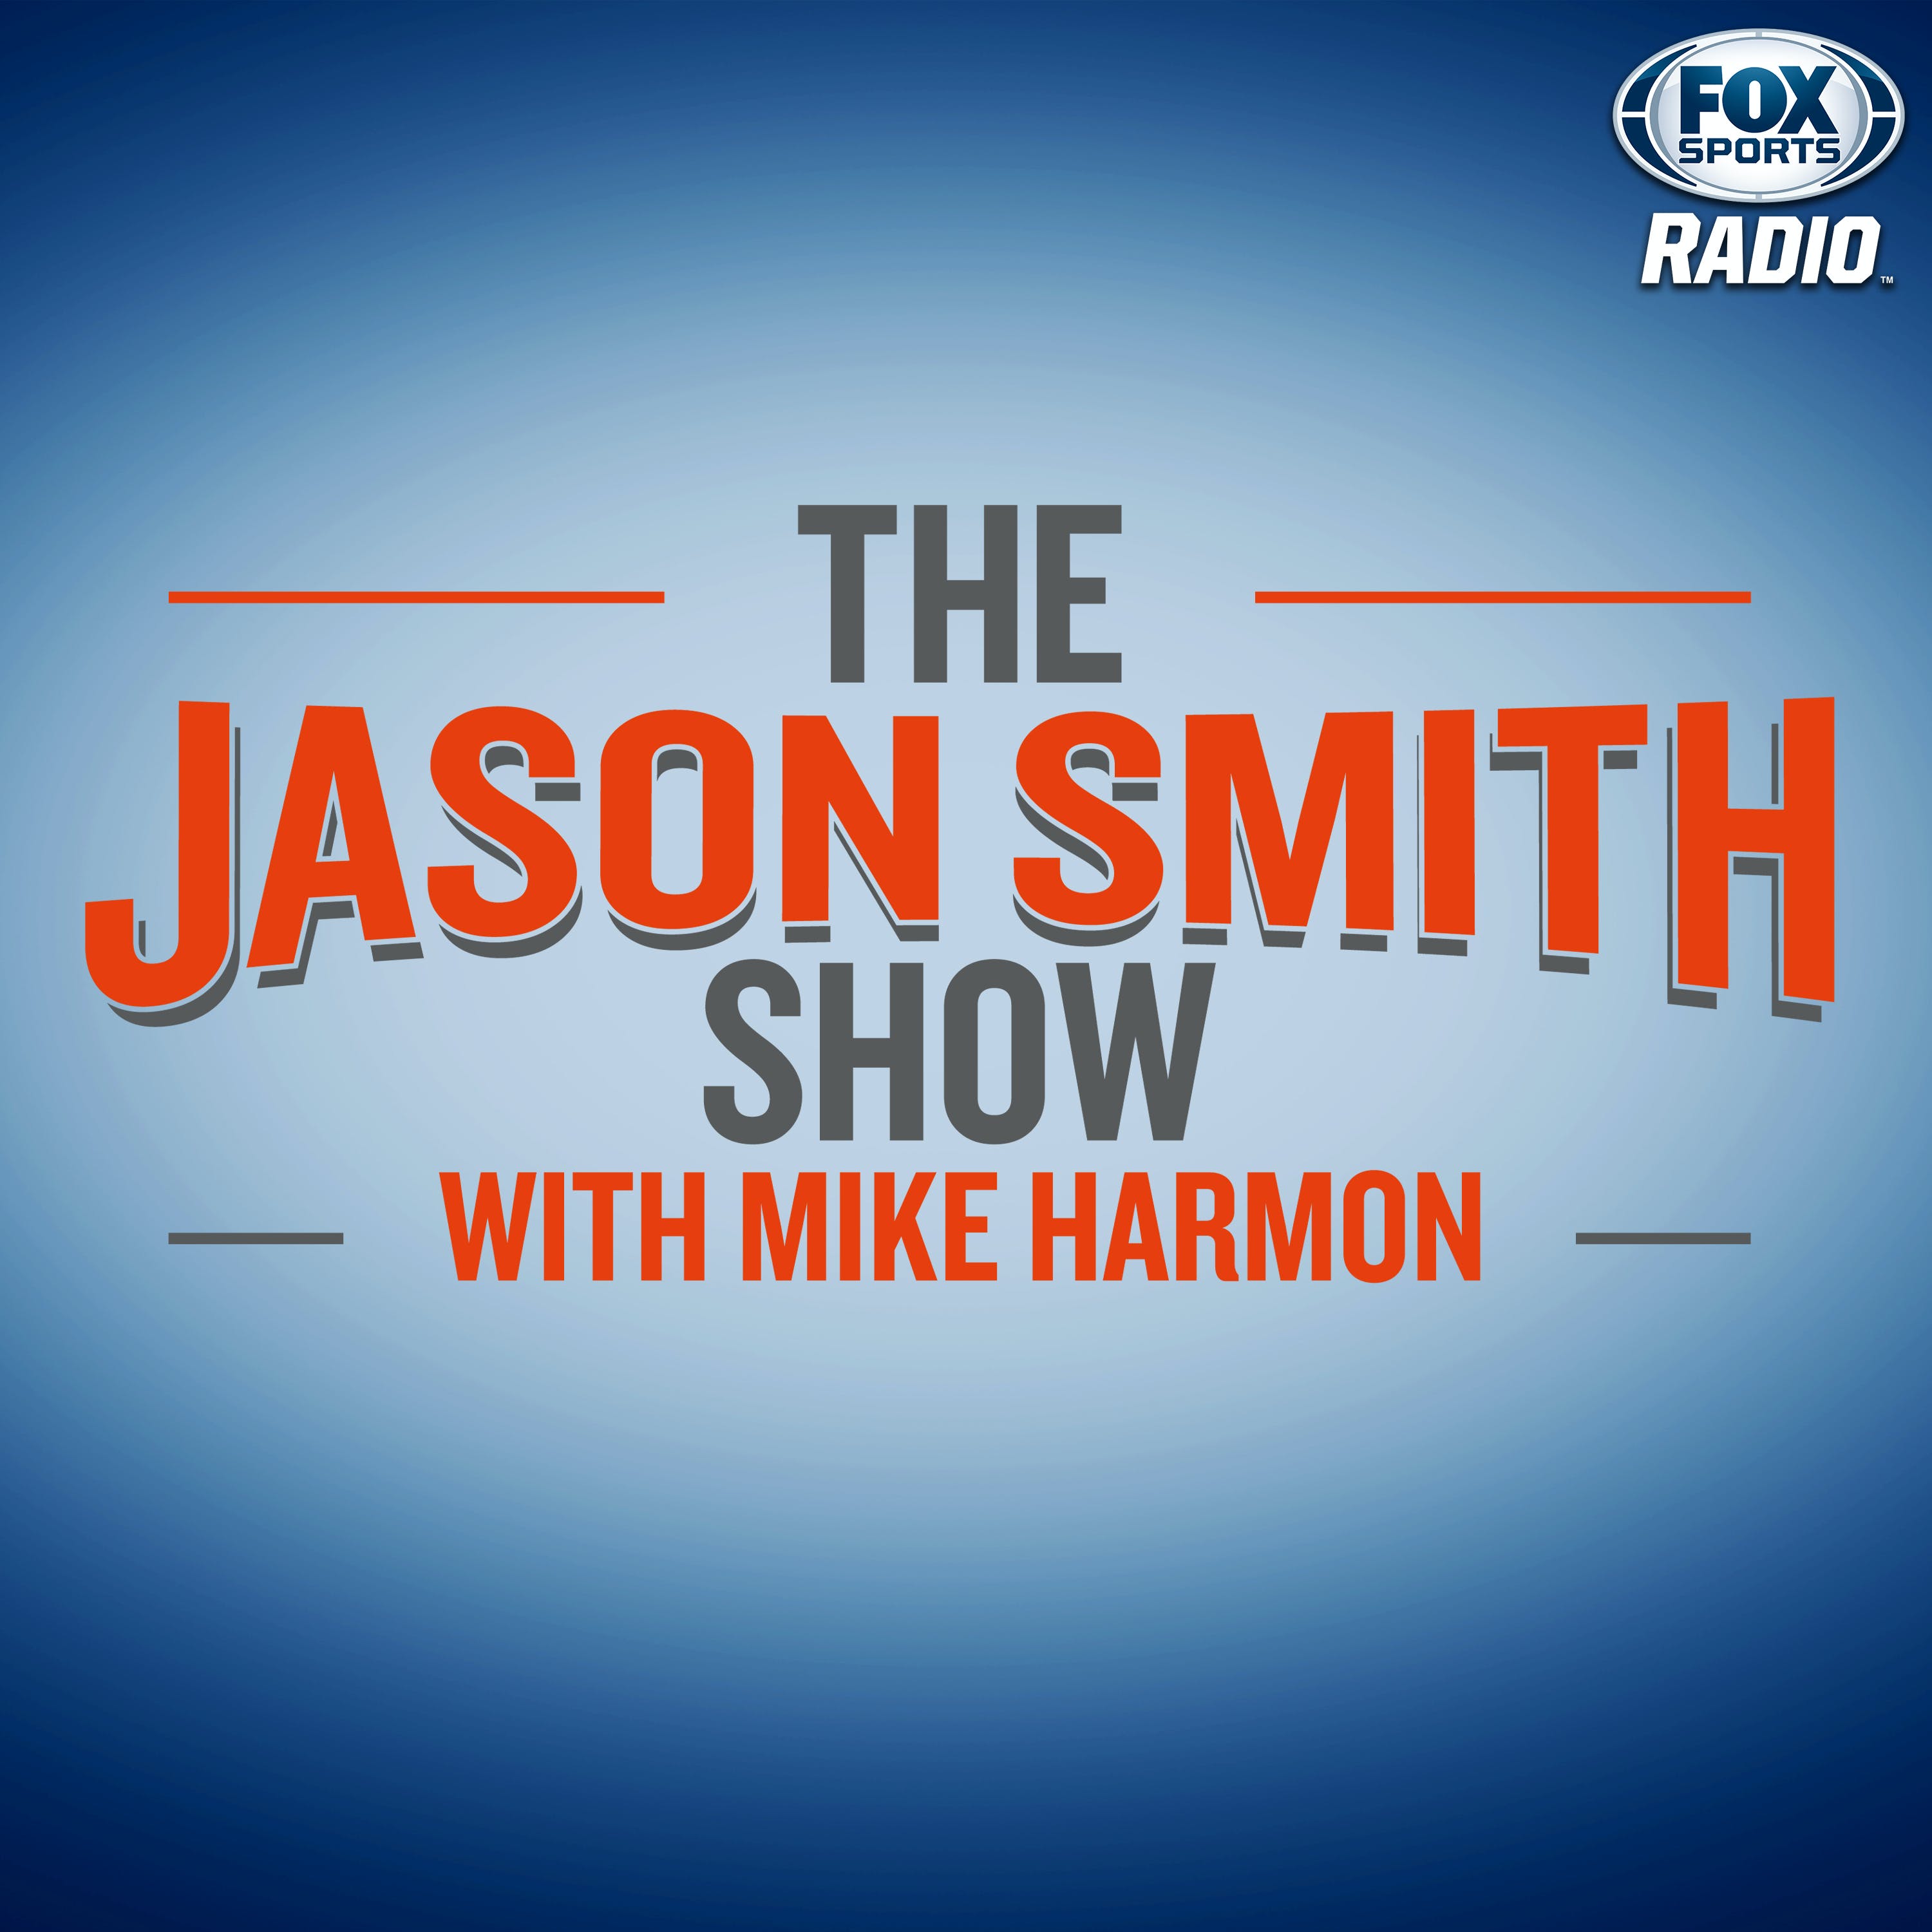 07/27/2021 - Best of The Jason Smith Show with Mike Harmon